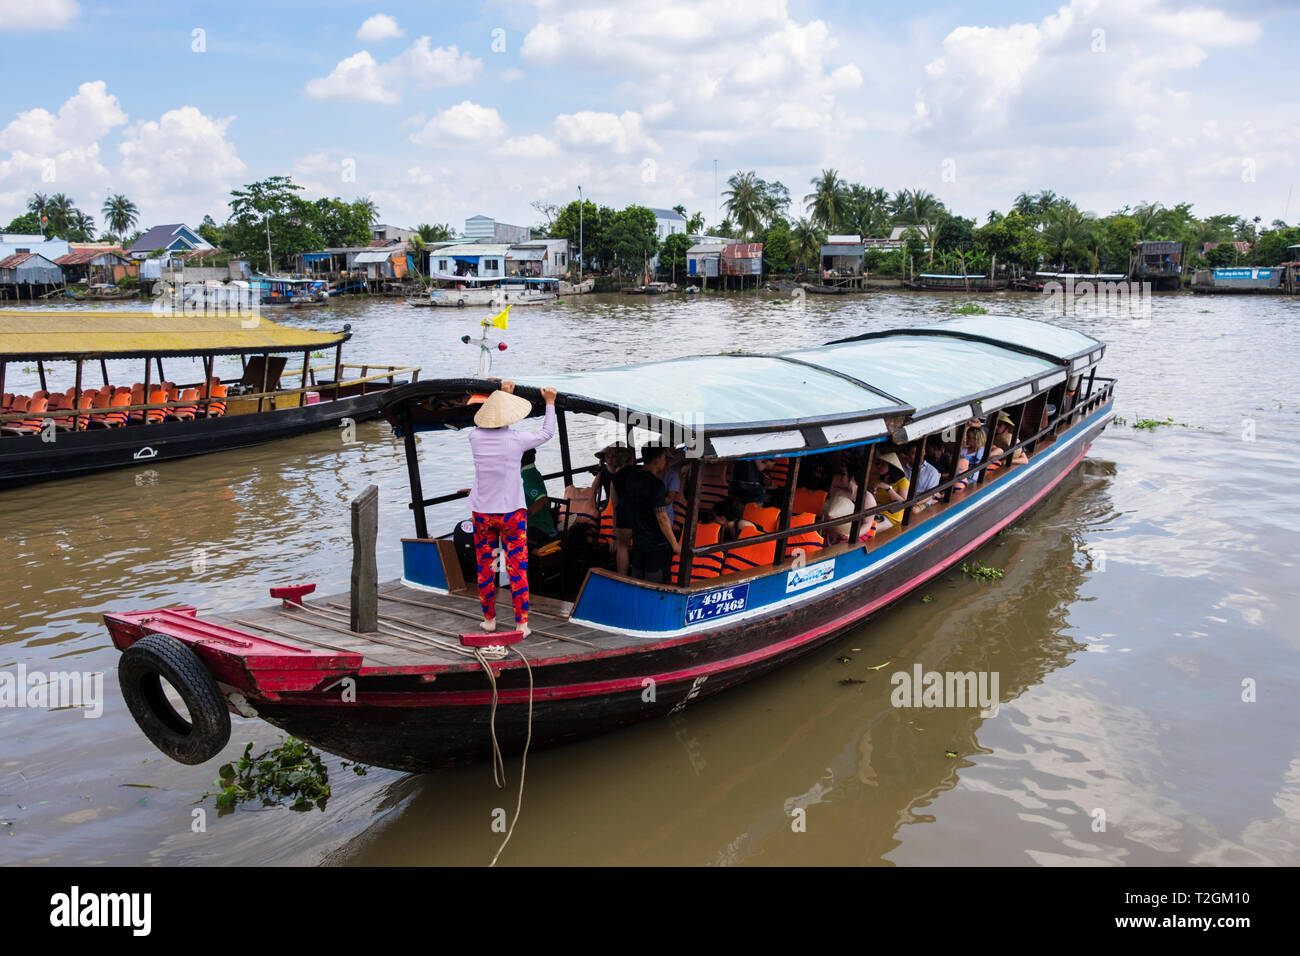 Tourists in traditional boat for river trip in Mekong Delta. Cai Be, Tien Giang, Vietnam, Asia Stock Photo